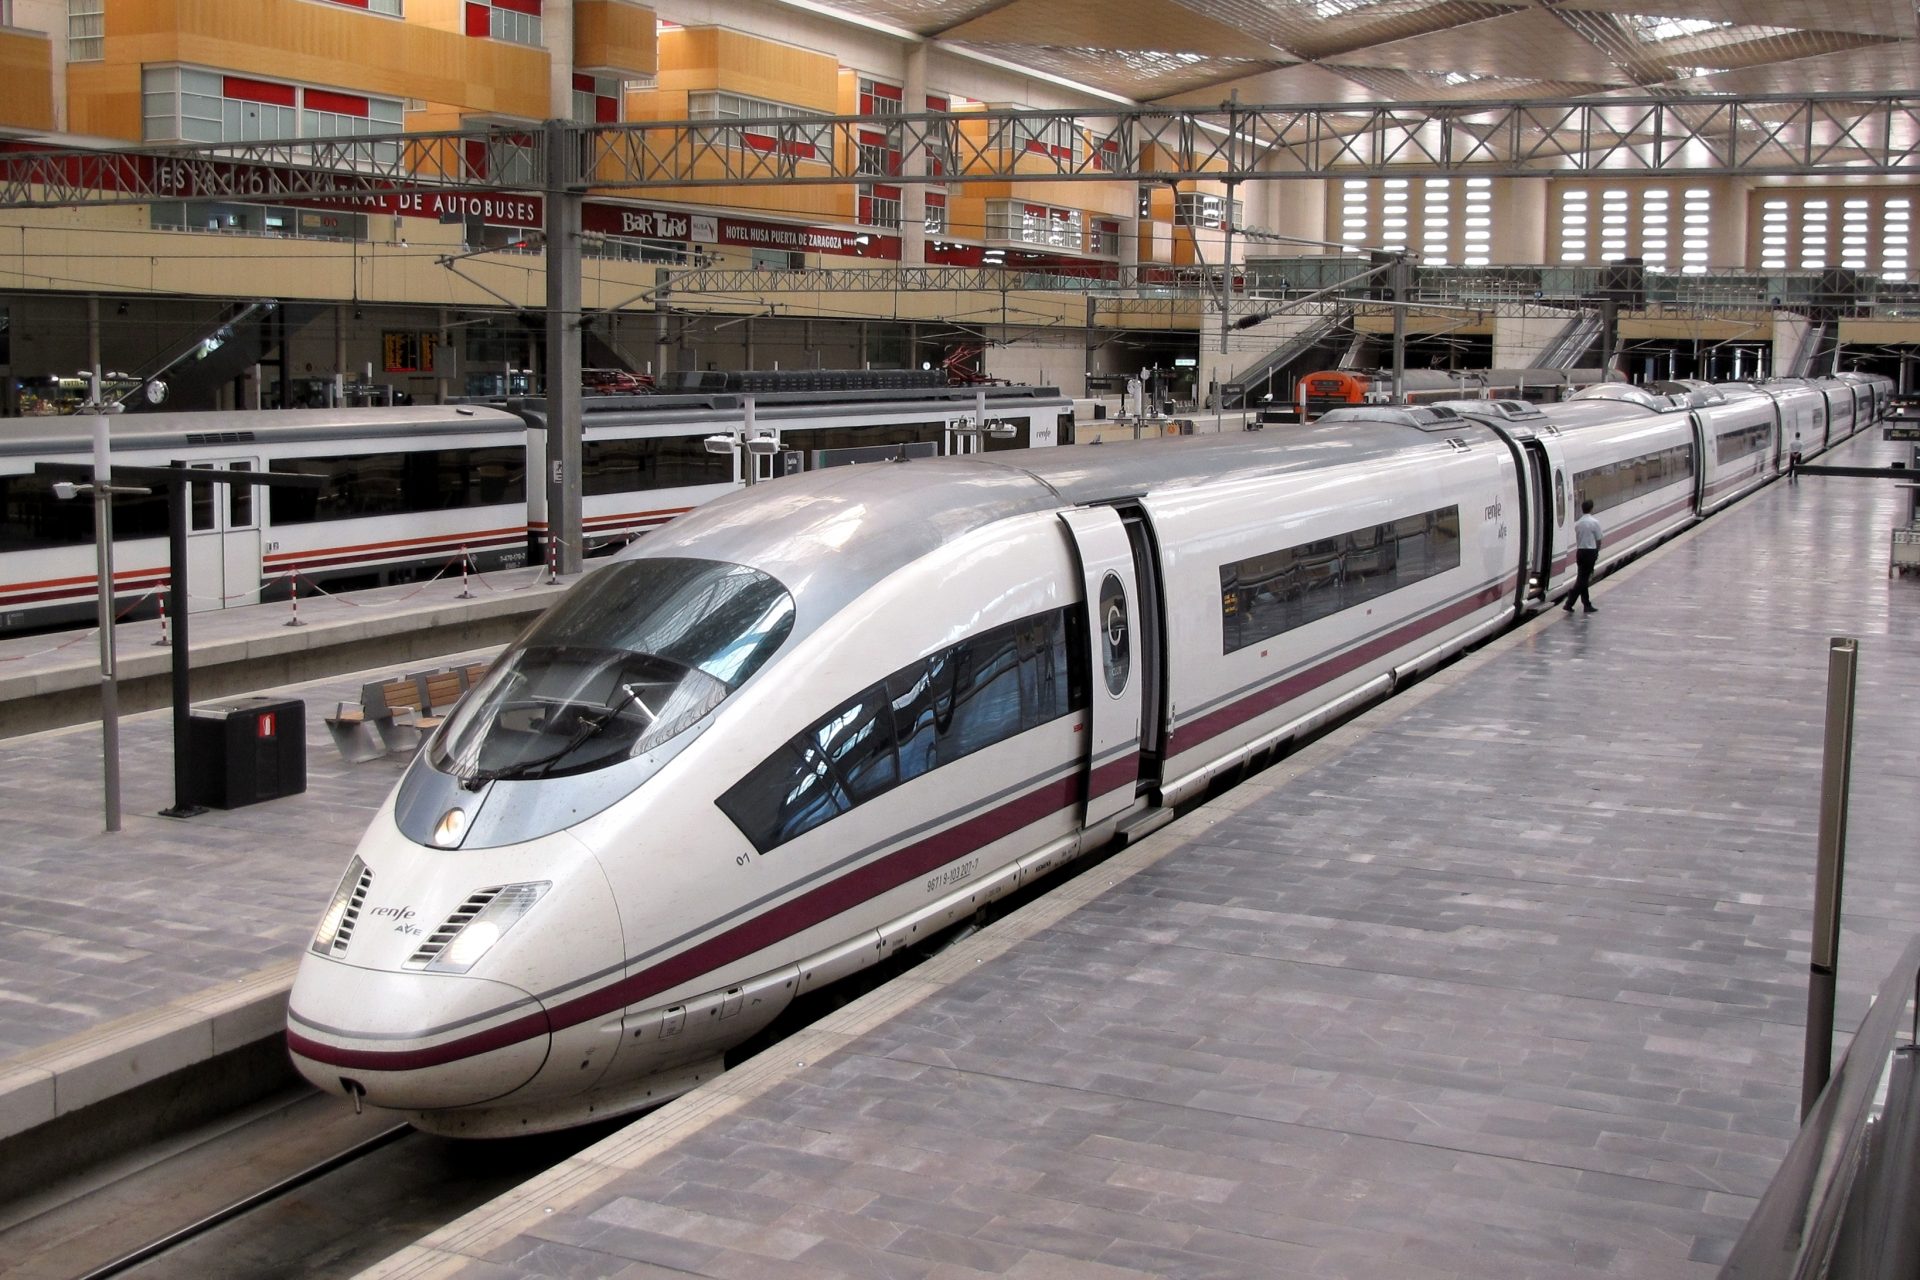 <p><span>The AVE (Alta Velocidad España) operates at a commercial speed of 310 km per hour (193 mph) and has made commuting between Barcelona and Madrid much easier. However, the fastest high-speed trains in Spain are the S-102 Talgo and S-103 "Velaro" trains. The S-103 reaches a maximum speed of 350 km per hour (217mph), and in July of 2006, it set a world record for an unmodified commercial passenger train when it reached the impressive speed of 404 km per hour (251mph). </span></p>